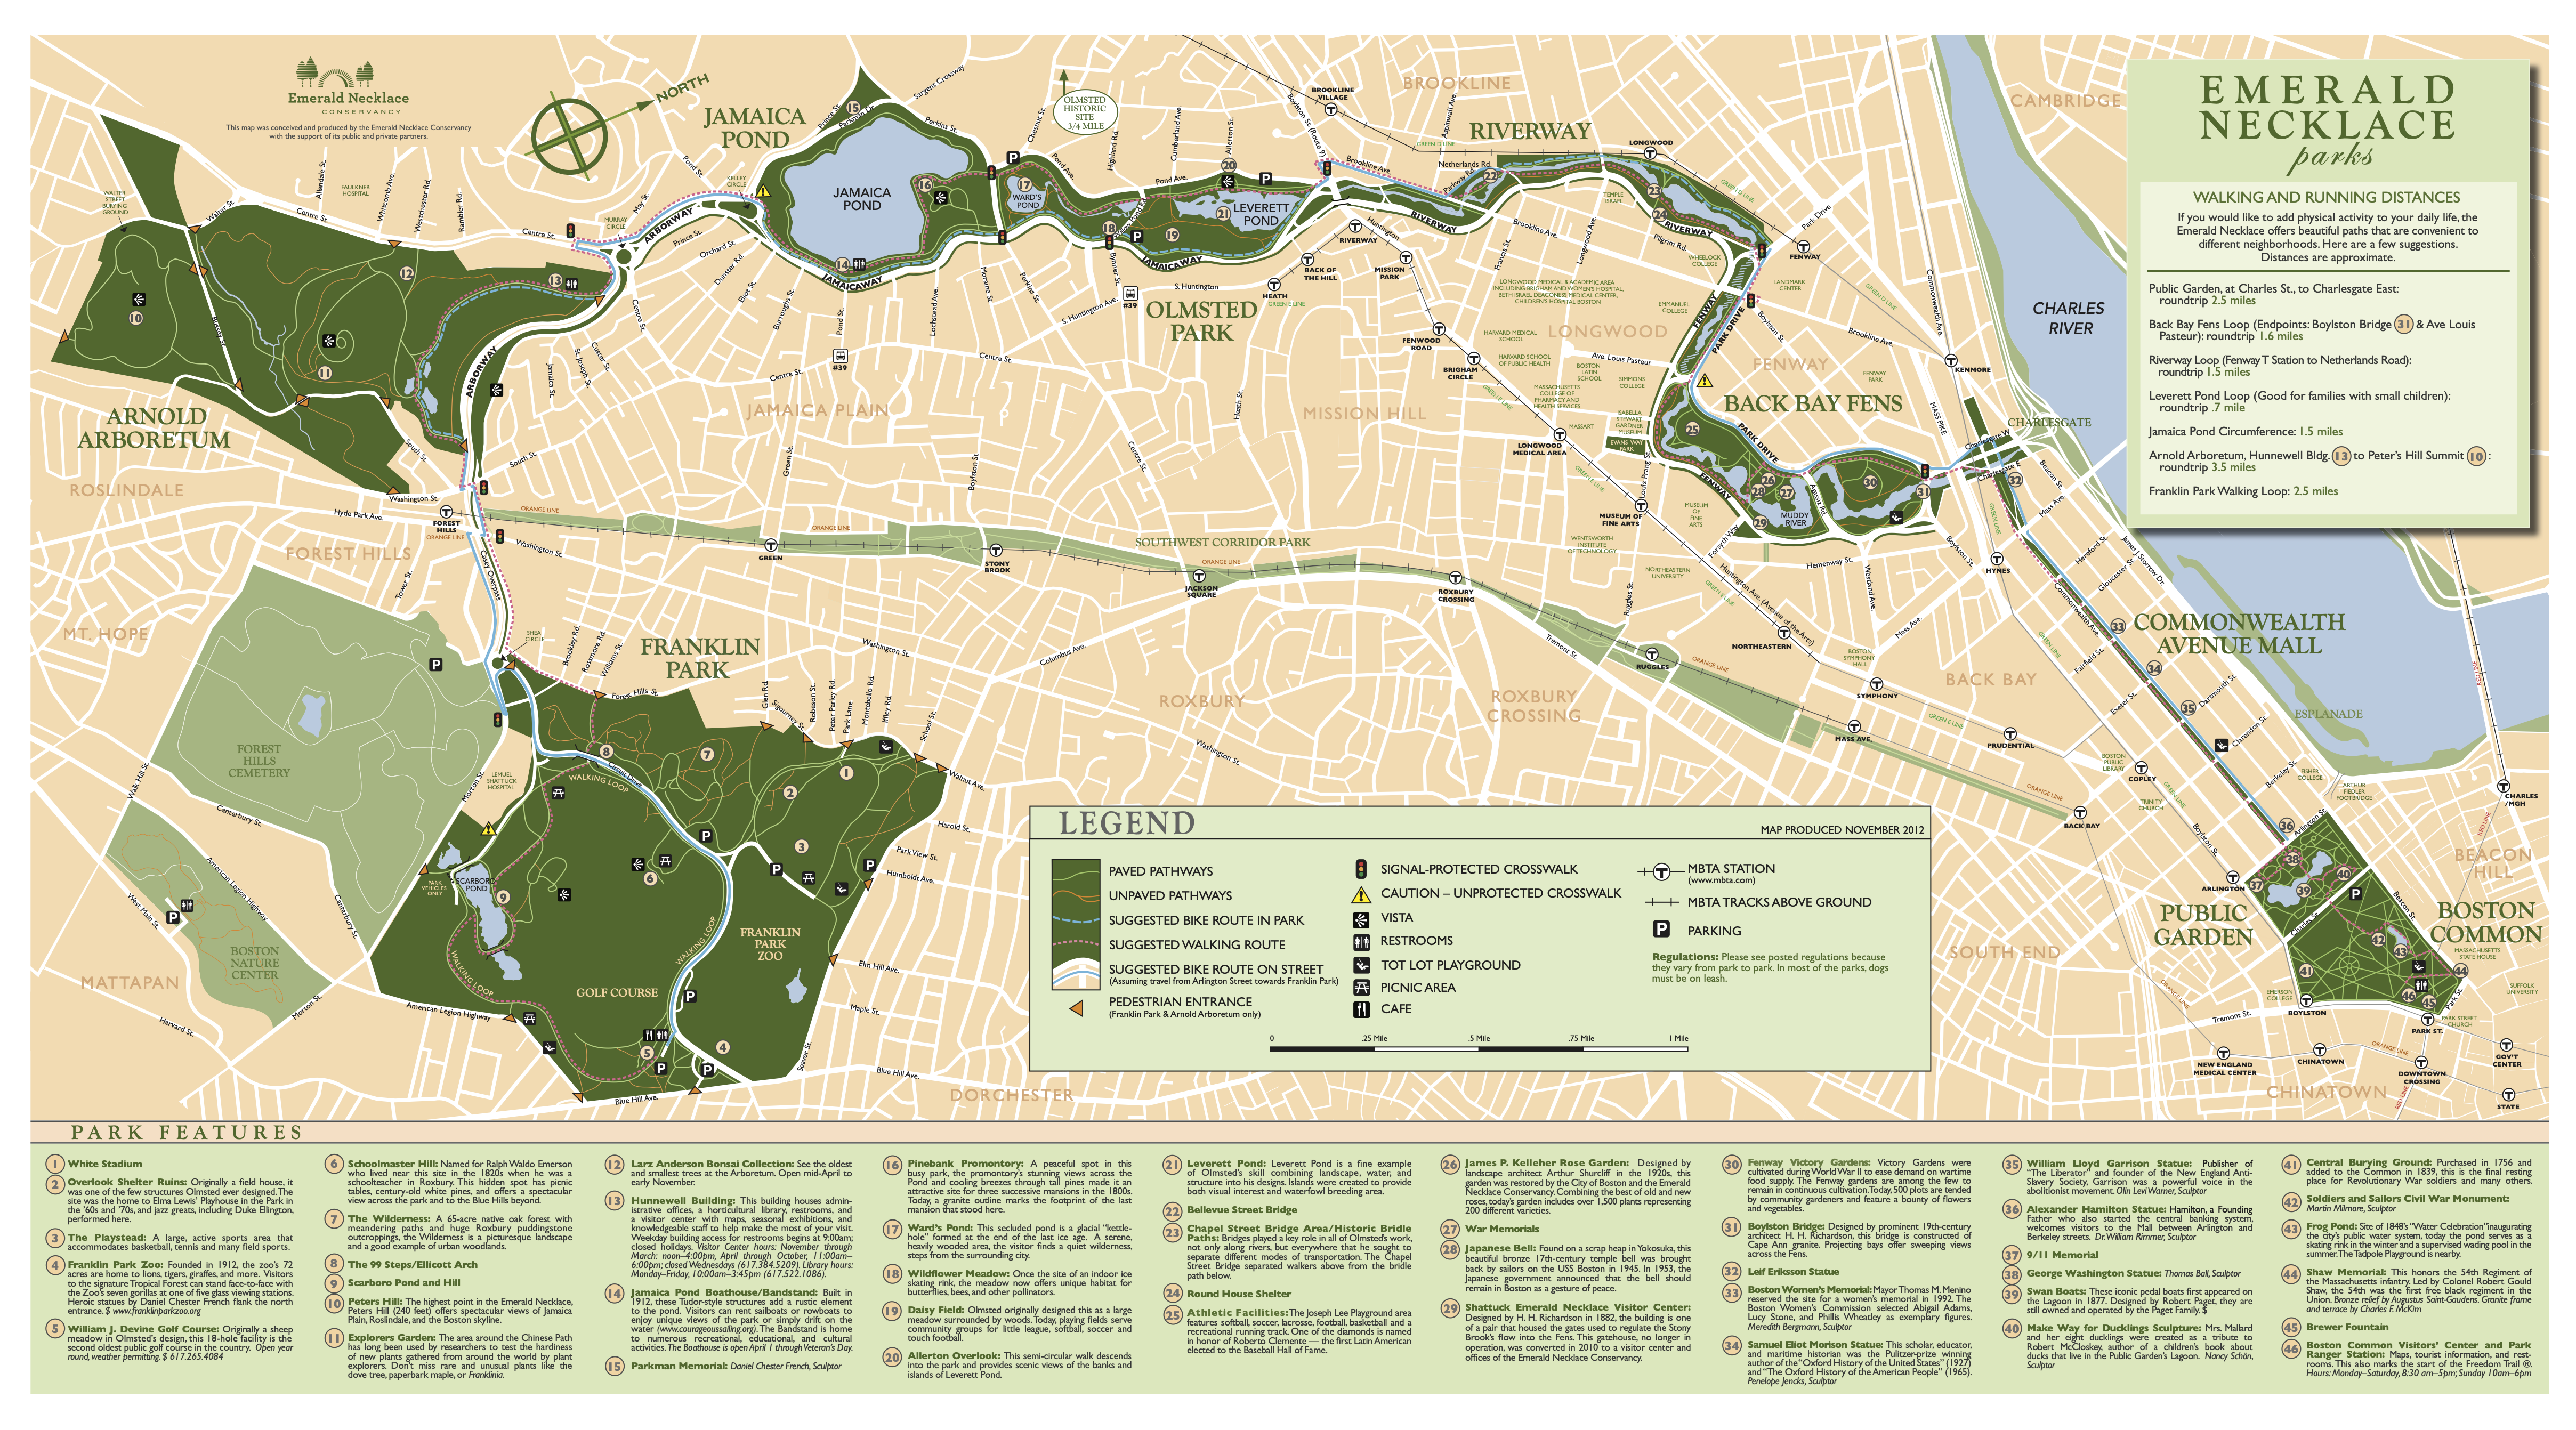 Image of a map of the Emerald Necklace Conservancy is a non-profit citizen’s advocacy group whose mission is to protect, restore, maintain, and promote the landscape, waterways, and parkways of the Emerald Necklace park system as special places for people to visit and enjoy. The organization focuses on the six parks designed by Frederick Law Olmsted. Image courtesy of the Emerald Necklace Conservancy.